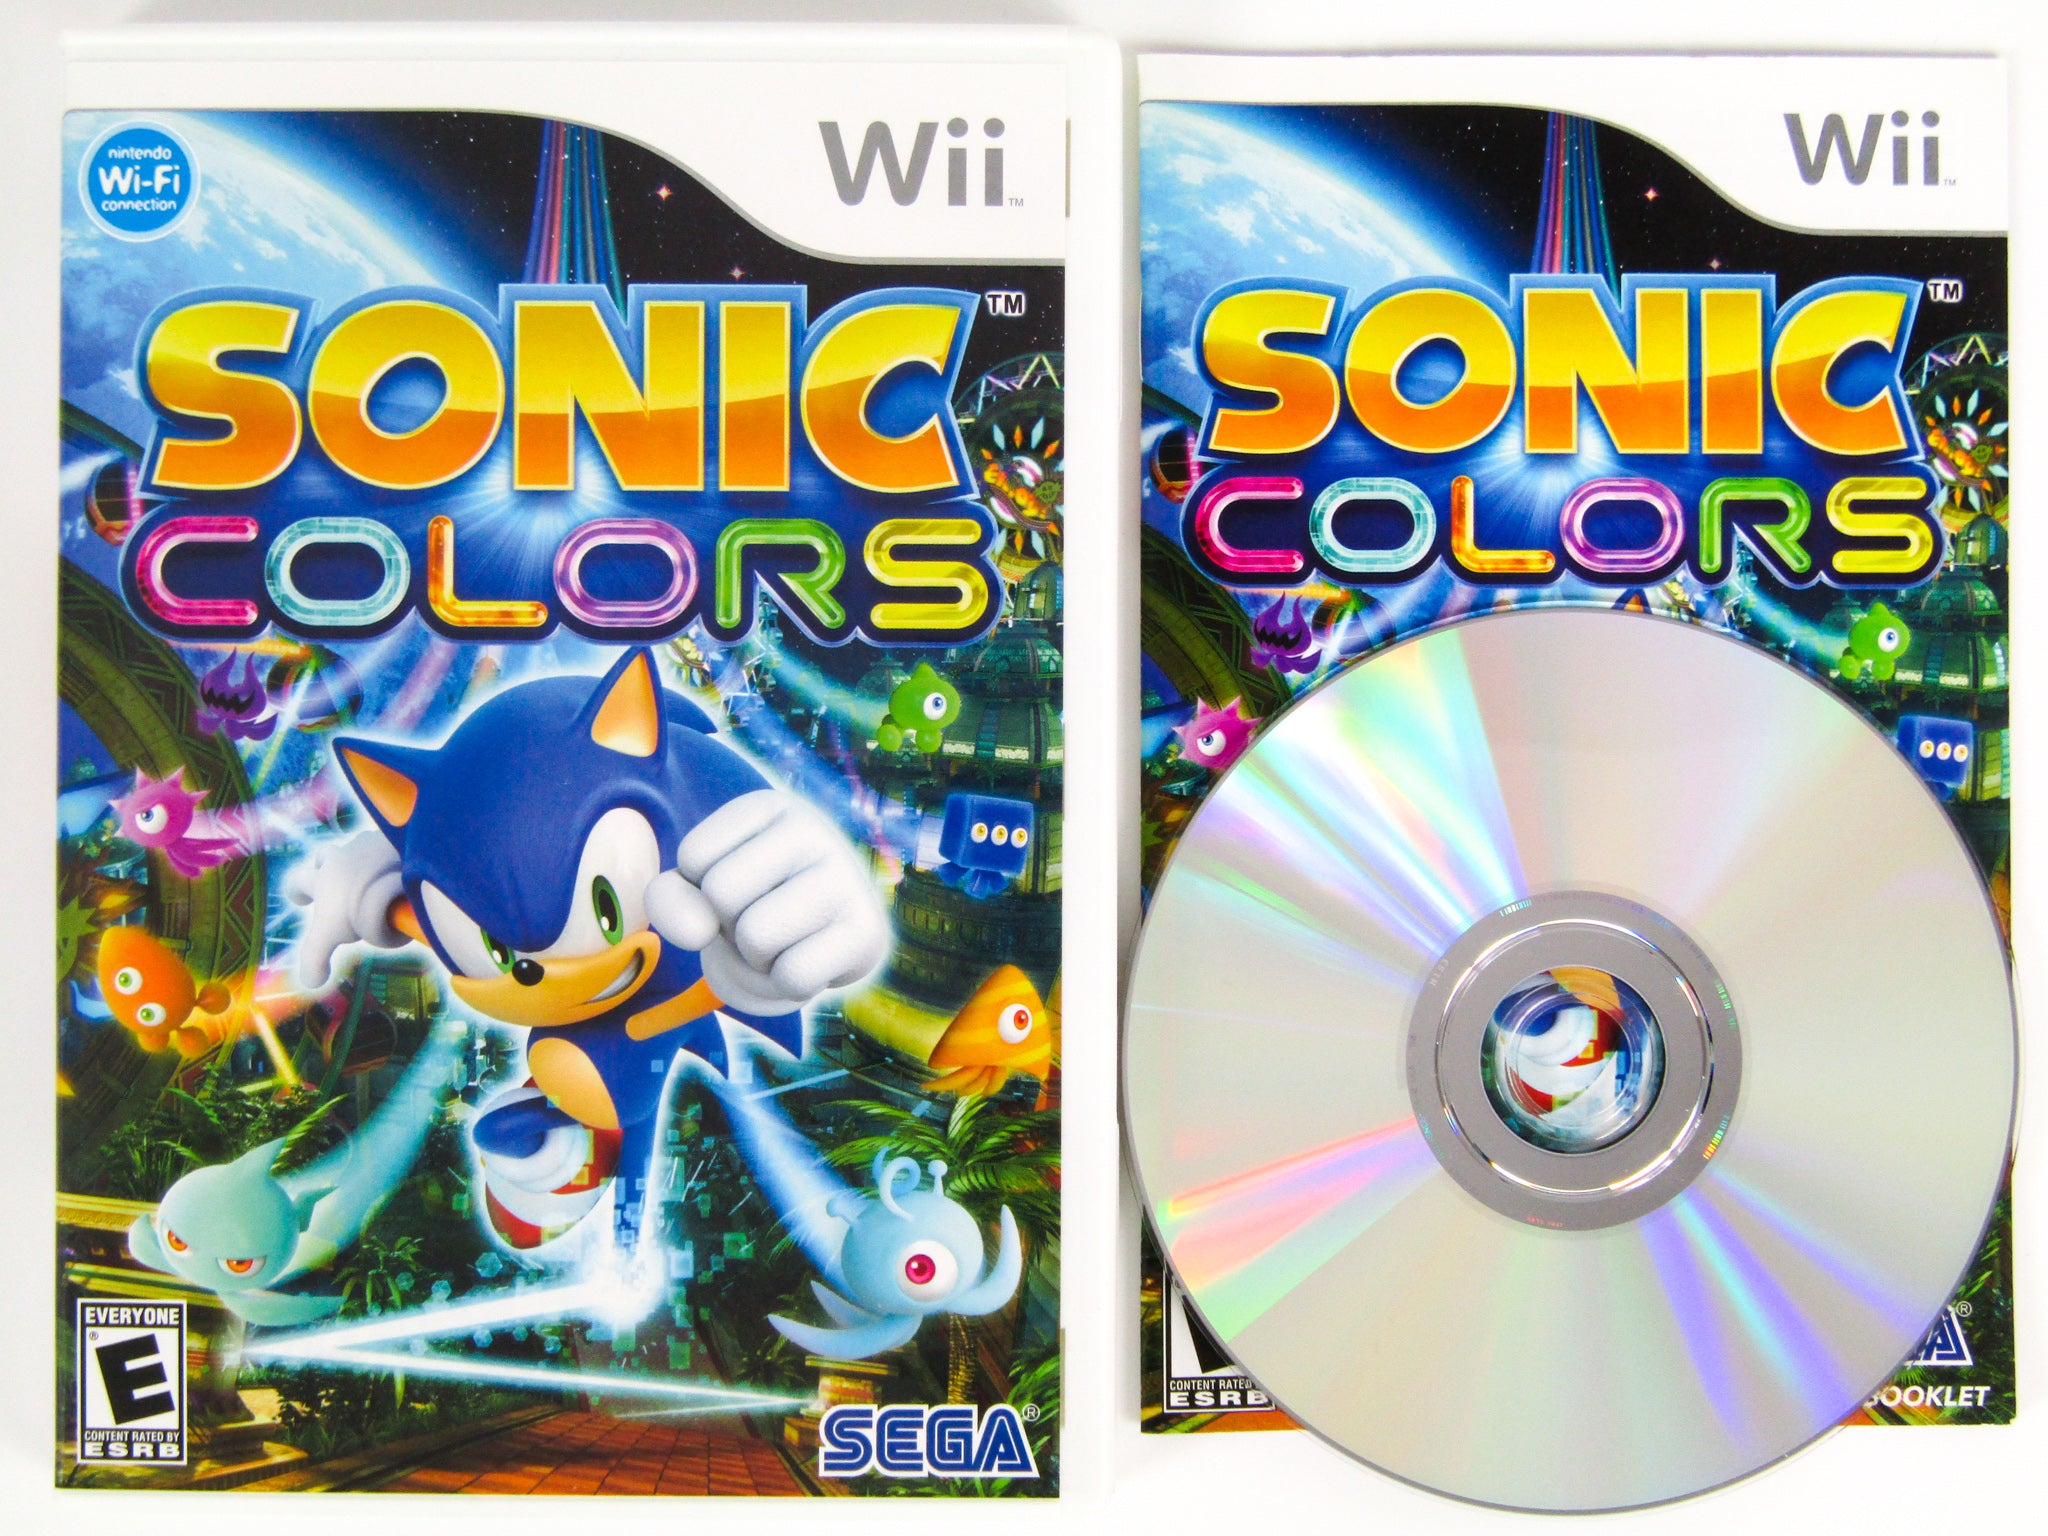 Sonic Colors - Wii